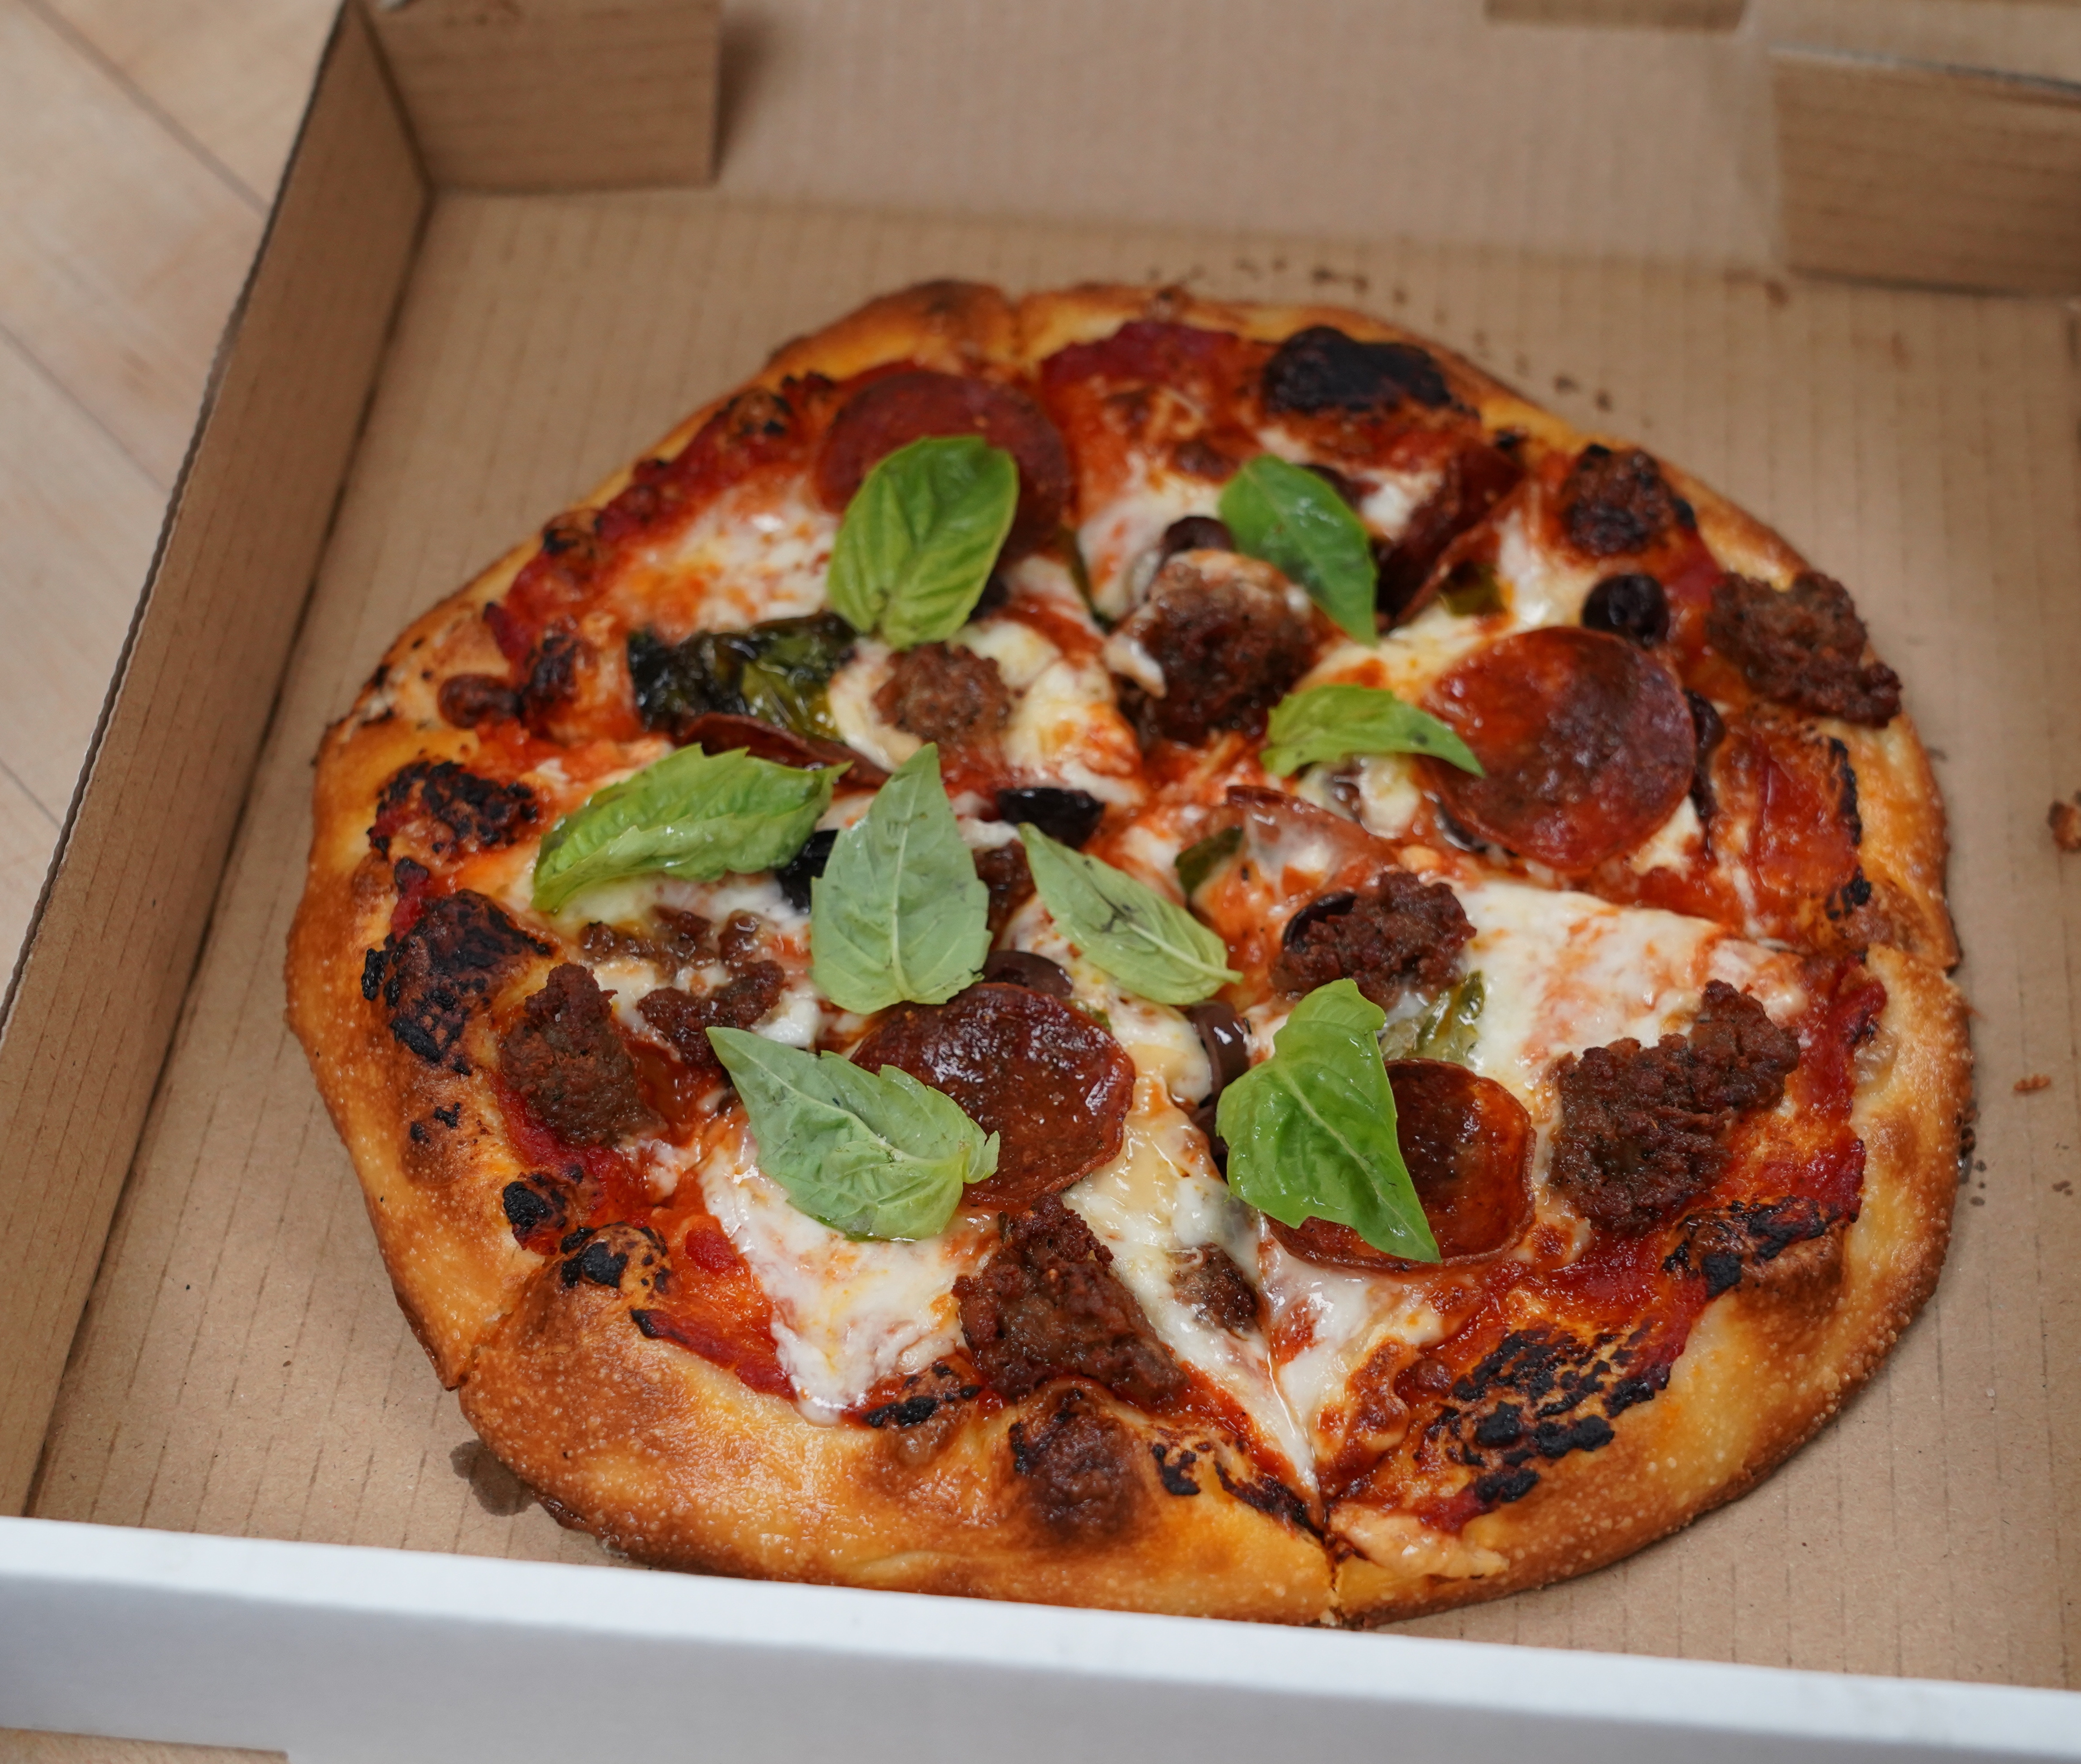 A pizza sits in a brown cardboard box